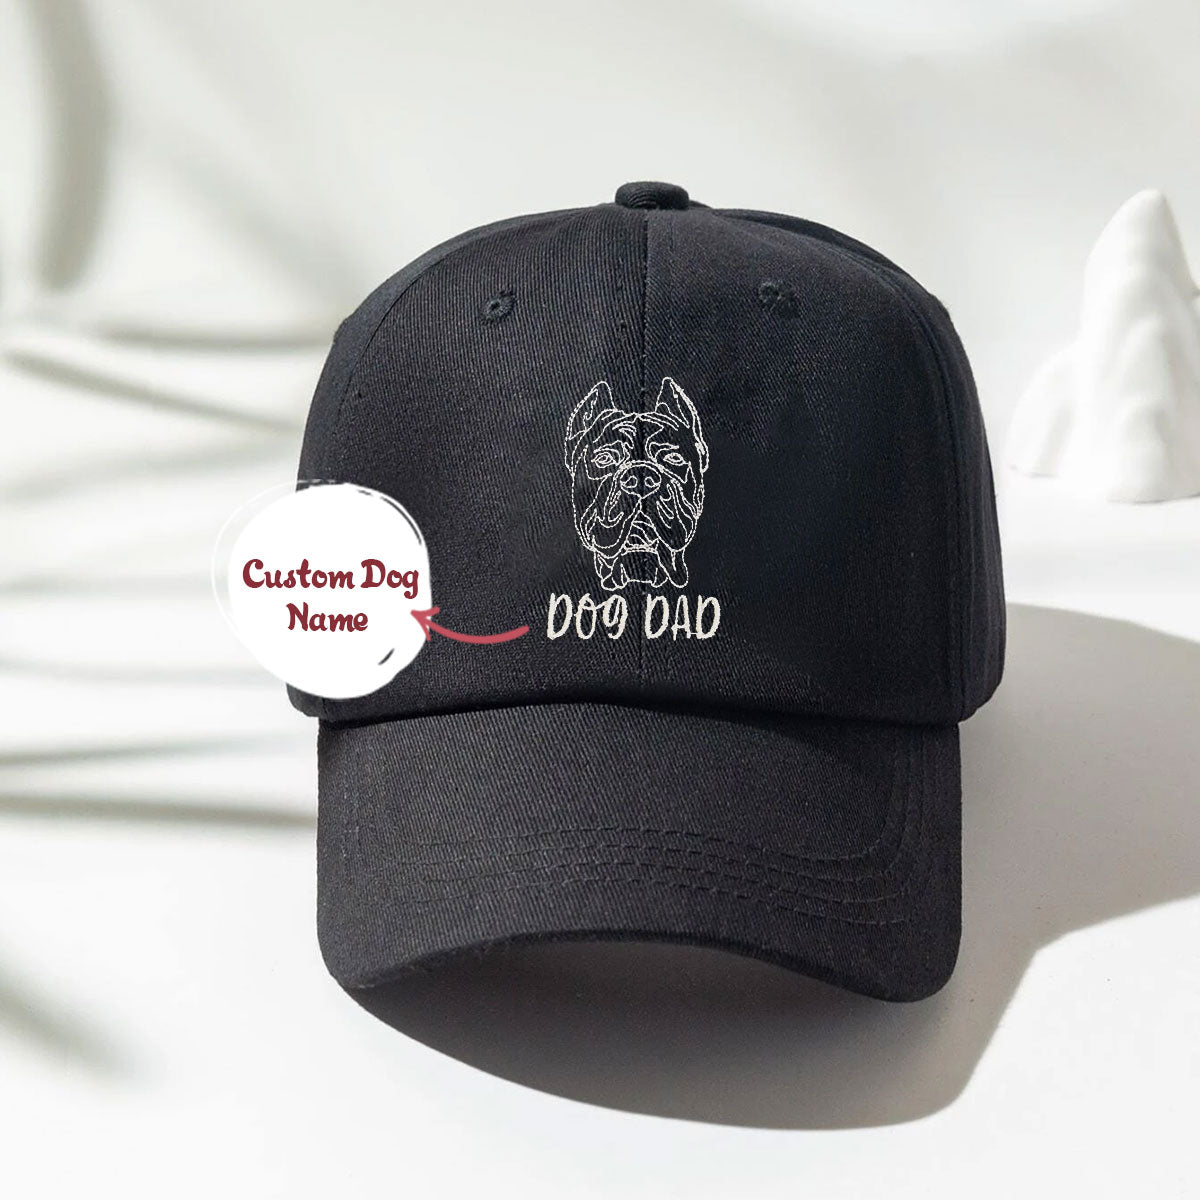 Personalized Cane Corso Dog Dad Embroidered Hat, Custom Hat with Dog Name